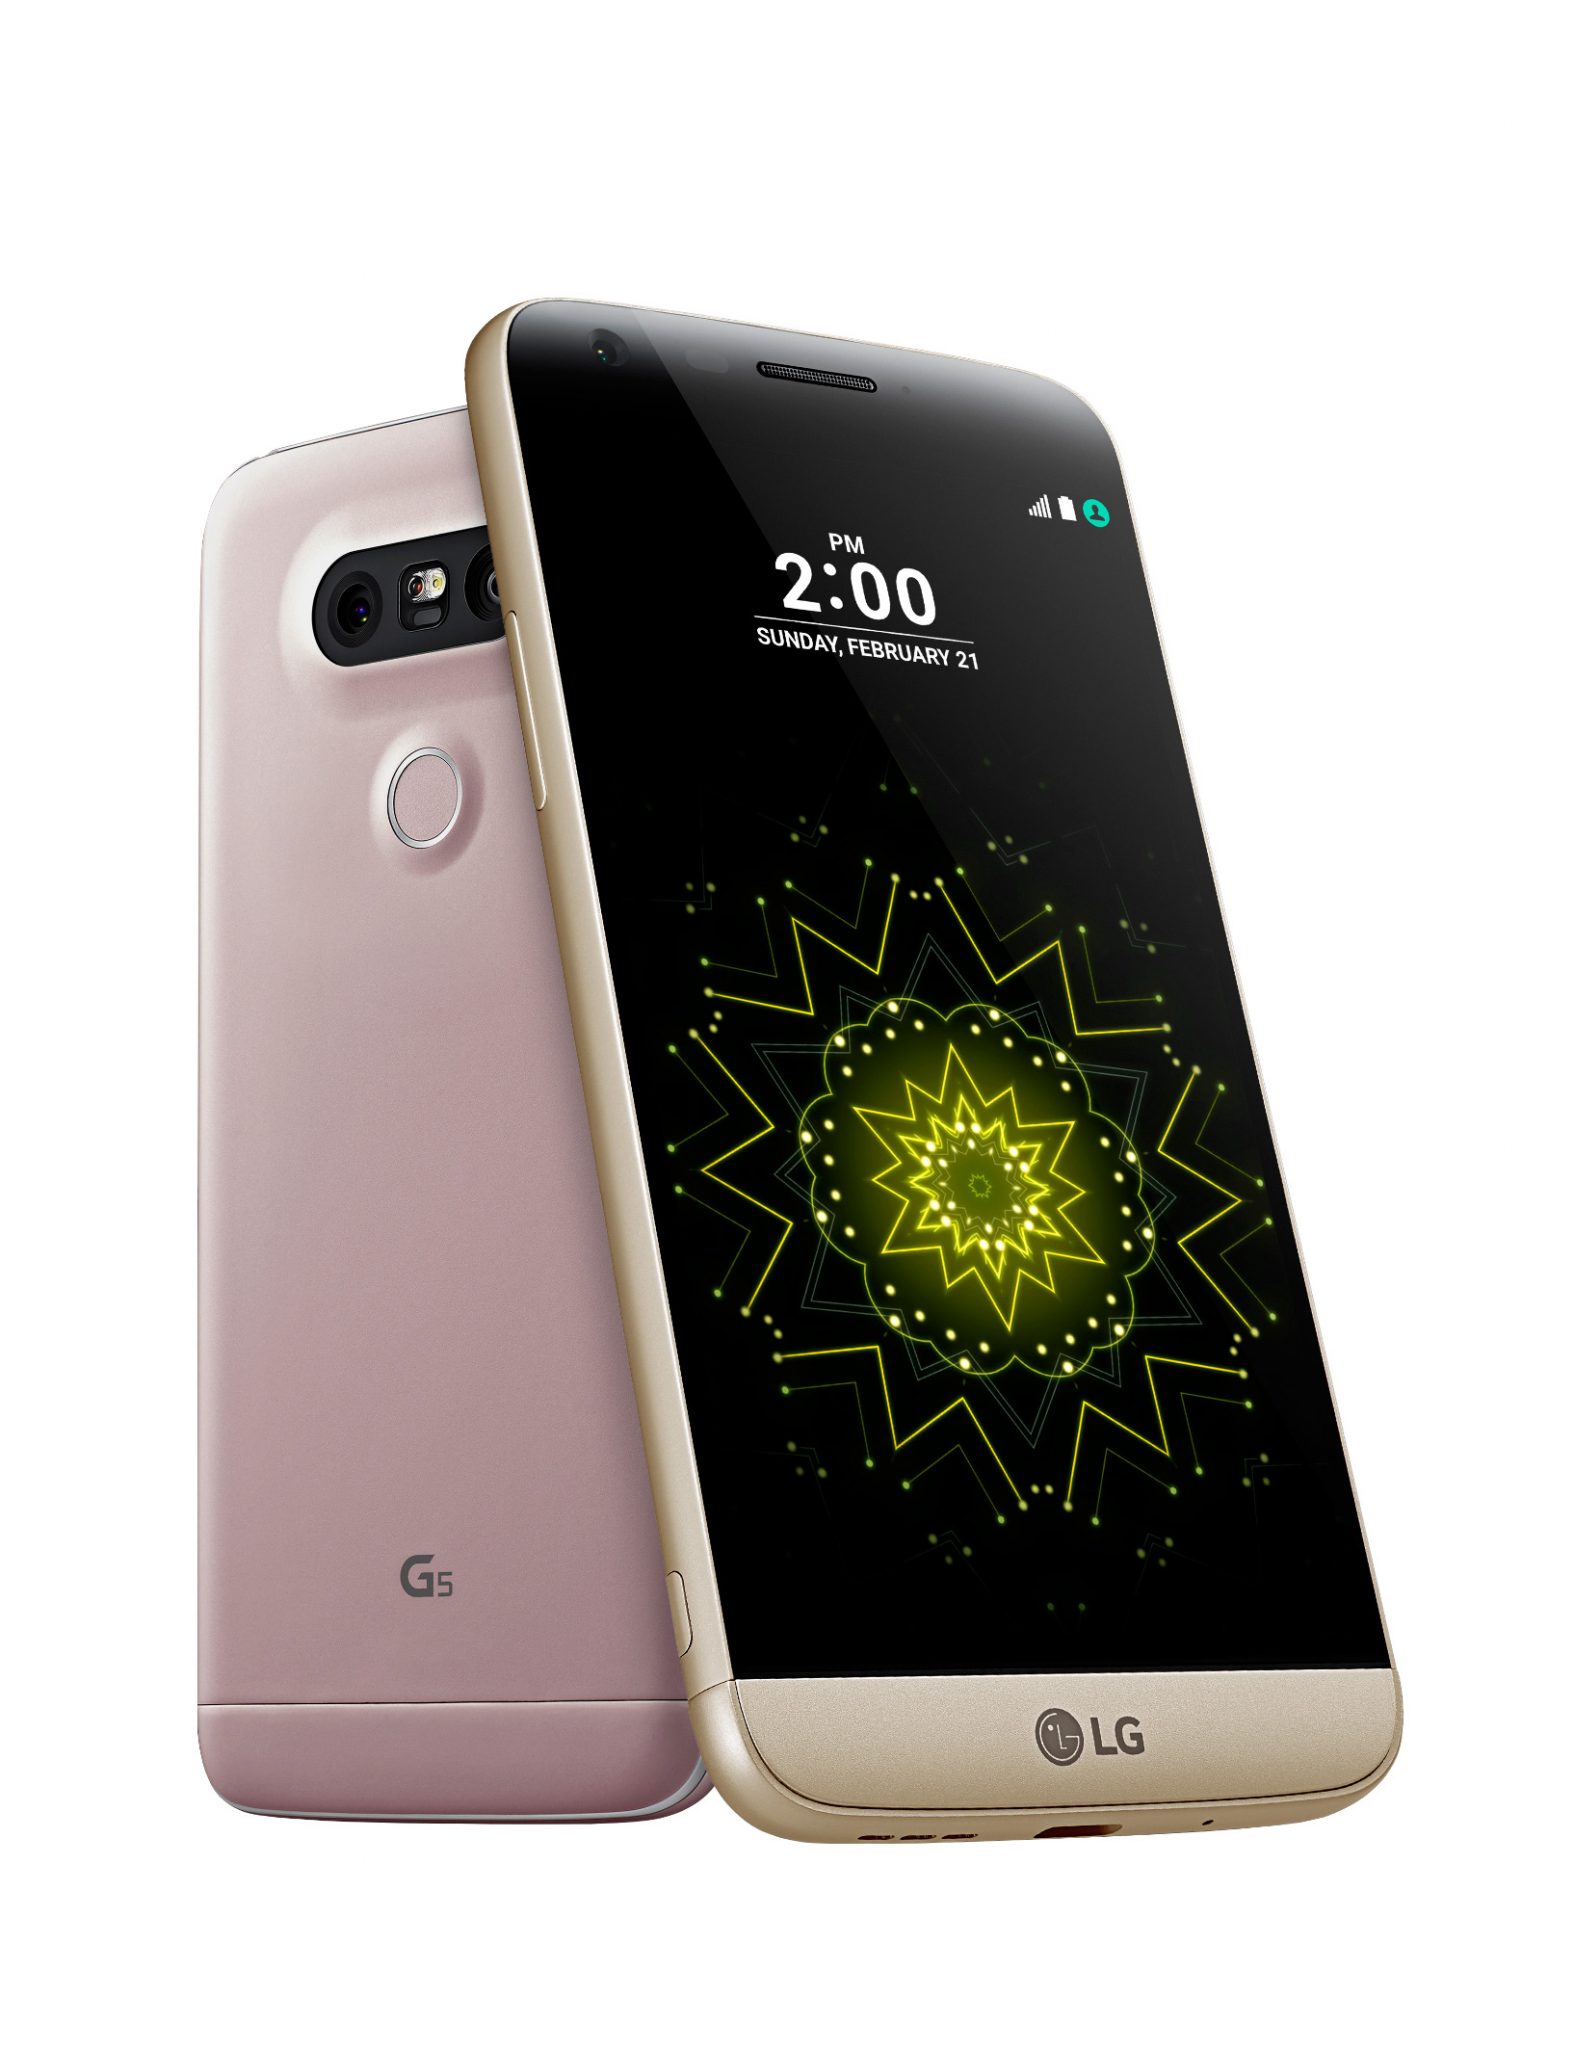 LG G5 1 - LG unveils the LG G5 with a Modular Design and Dual Cameras